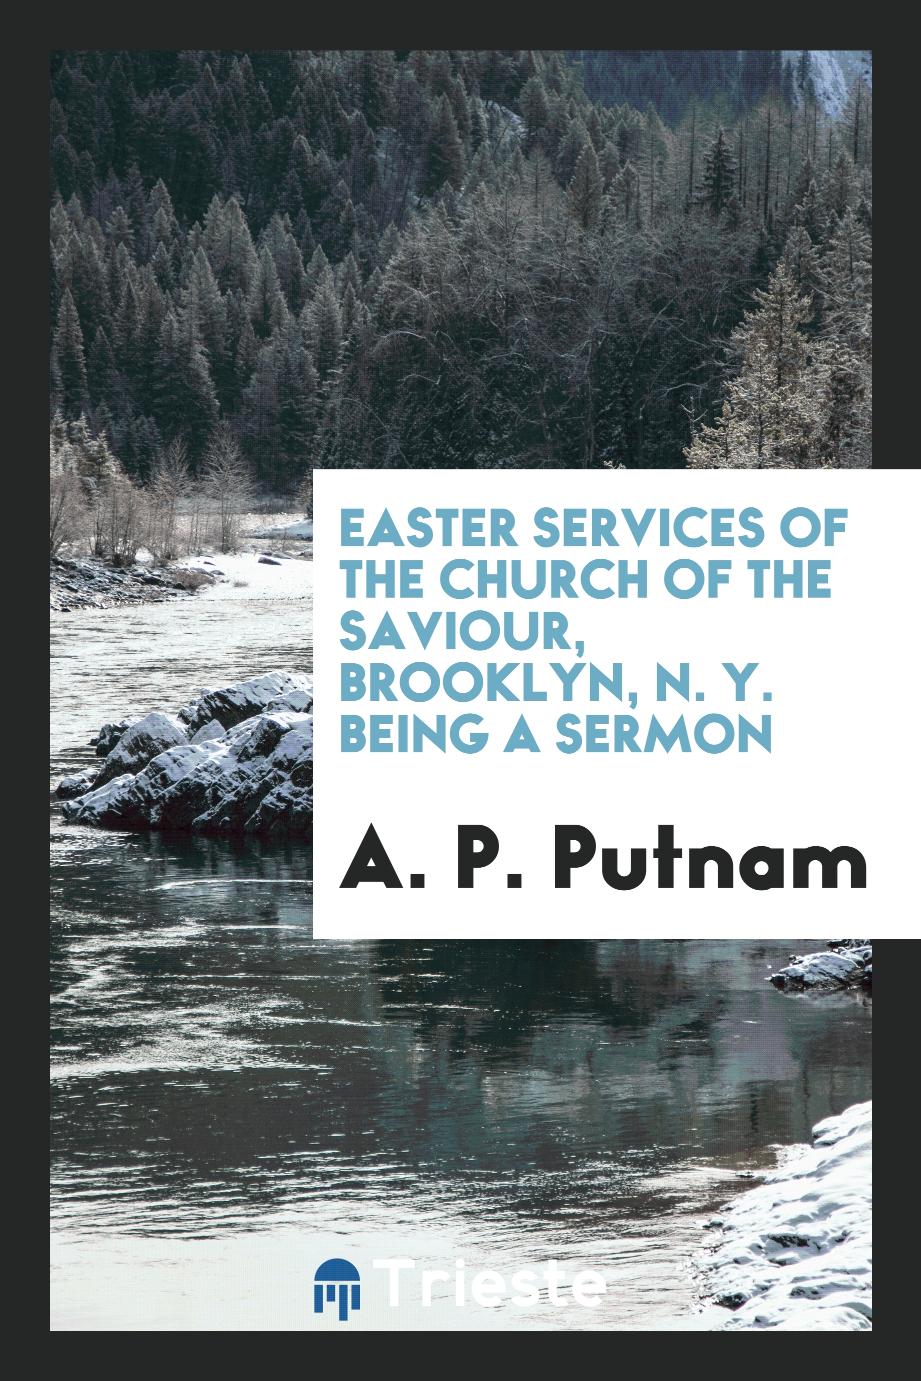 Easter Services of the Church of the Saviour, Brooklyn, N. Y. being A Sermon